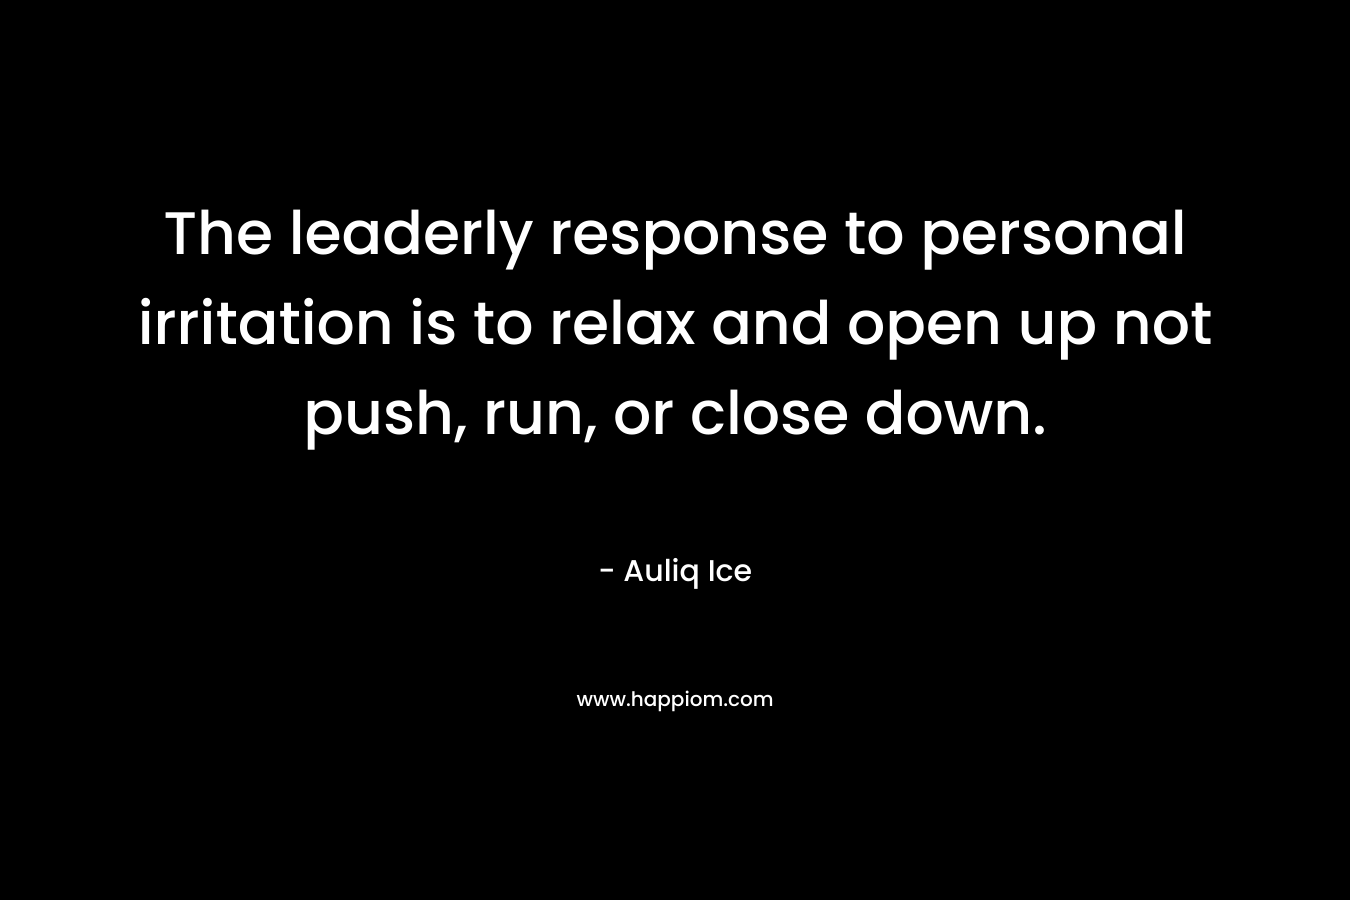 The leaderly response to personal irritation is to relax and open up not push, run, or close down.